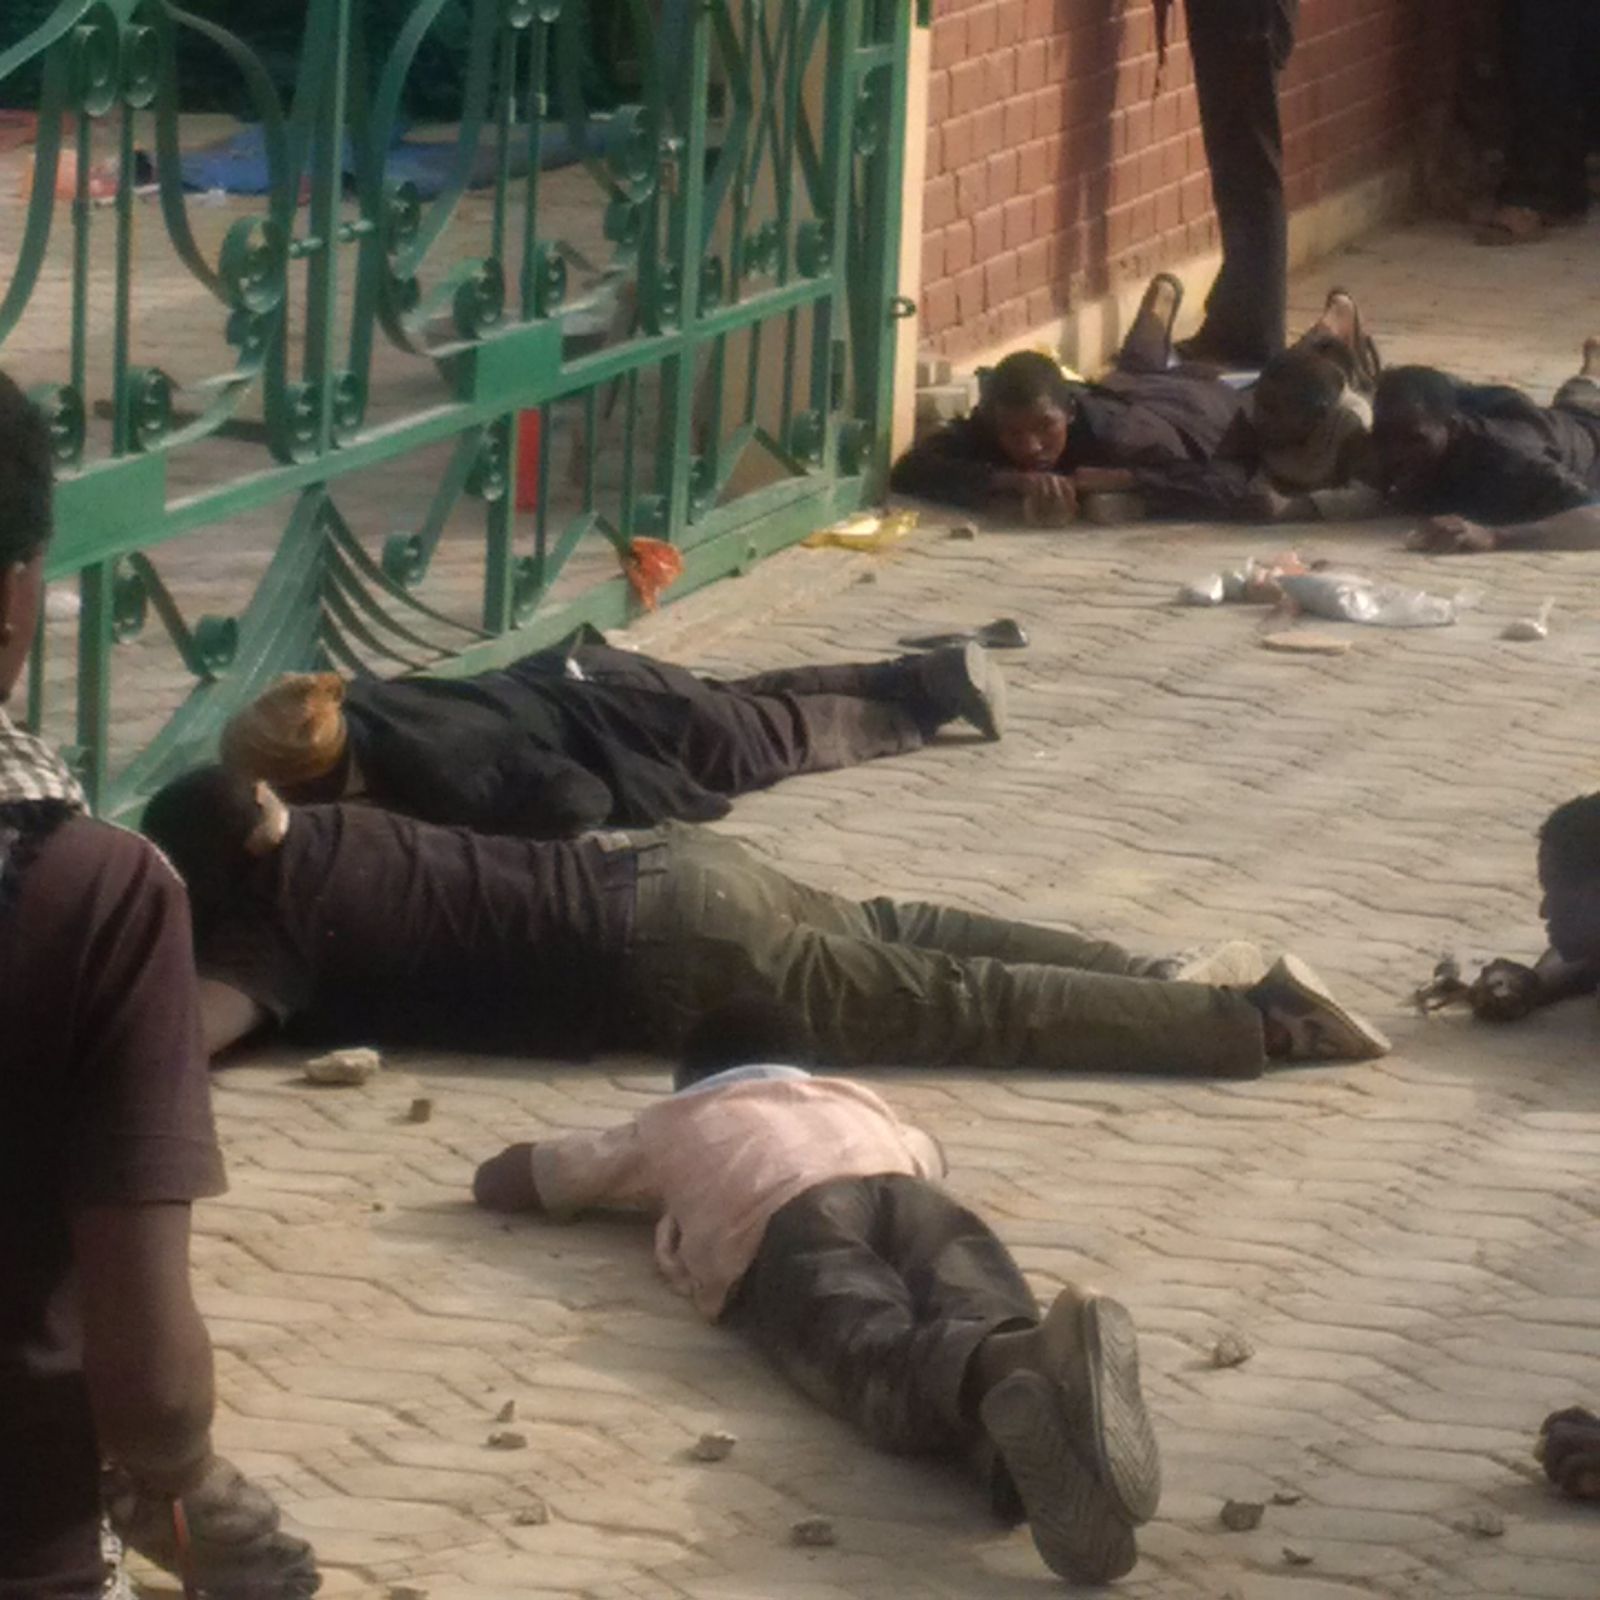 Hussayniyyah massacre committed by Nigeria forces in Zaria city